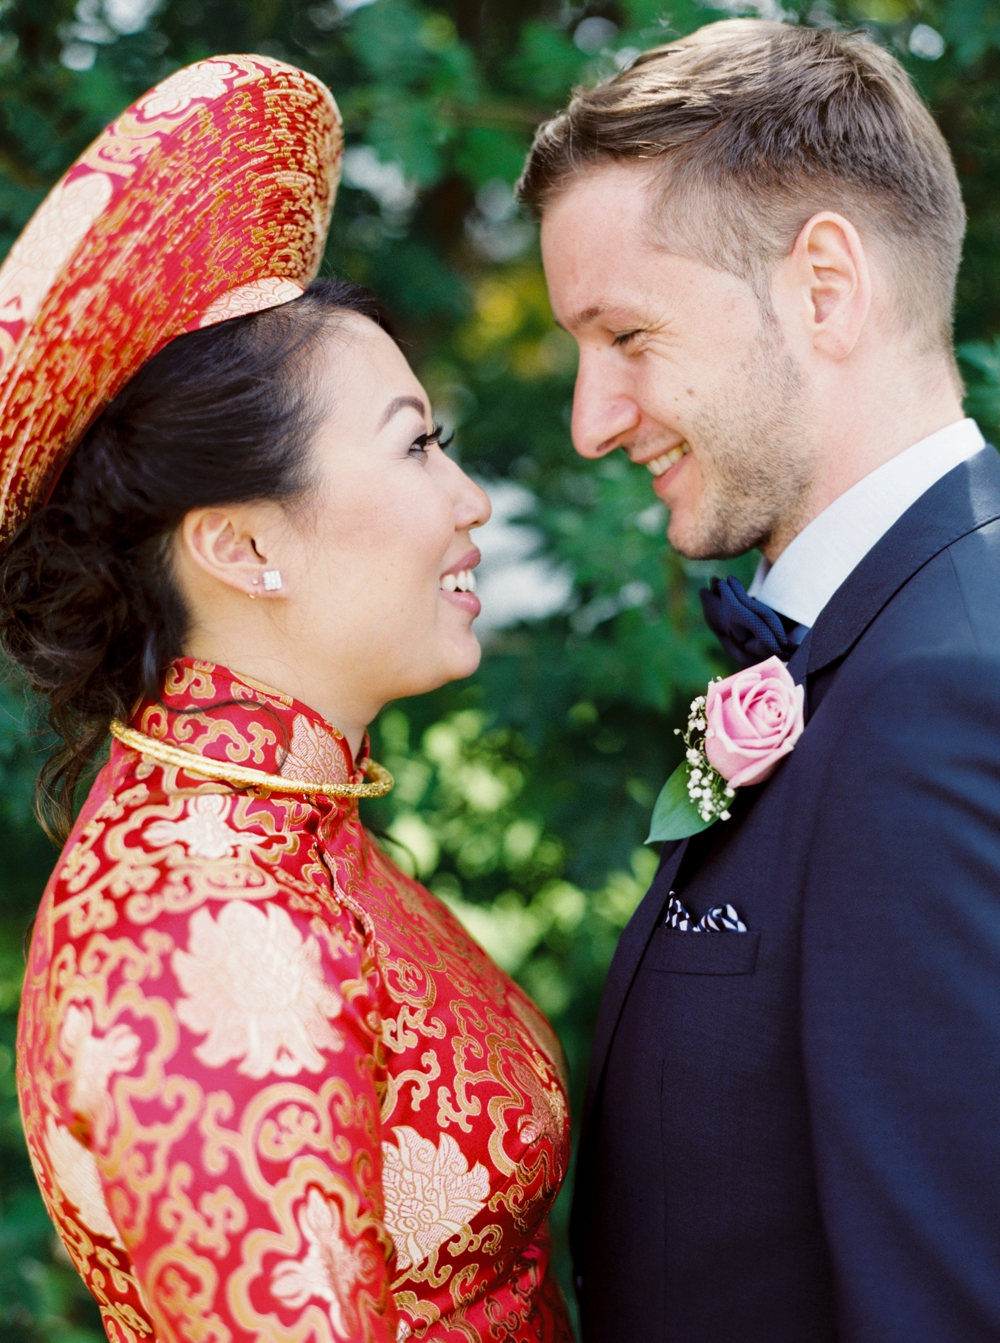 vietnamese wedding traditions and customs